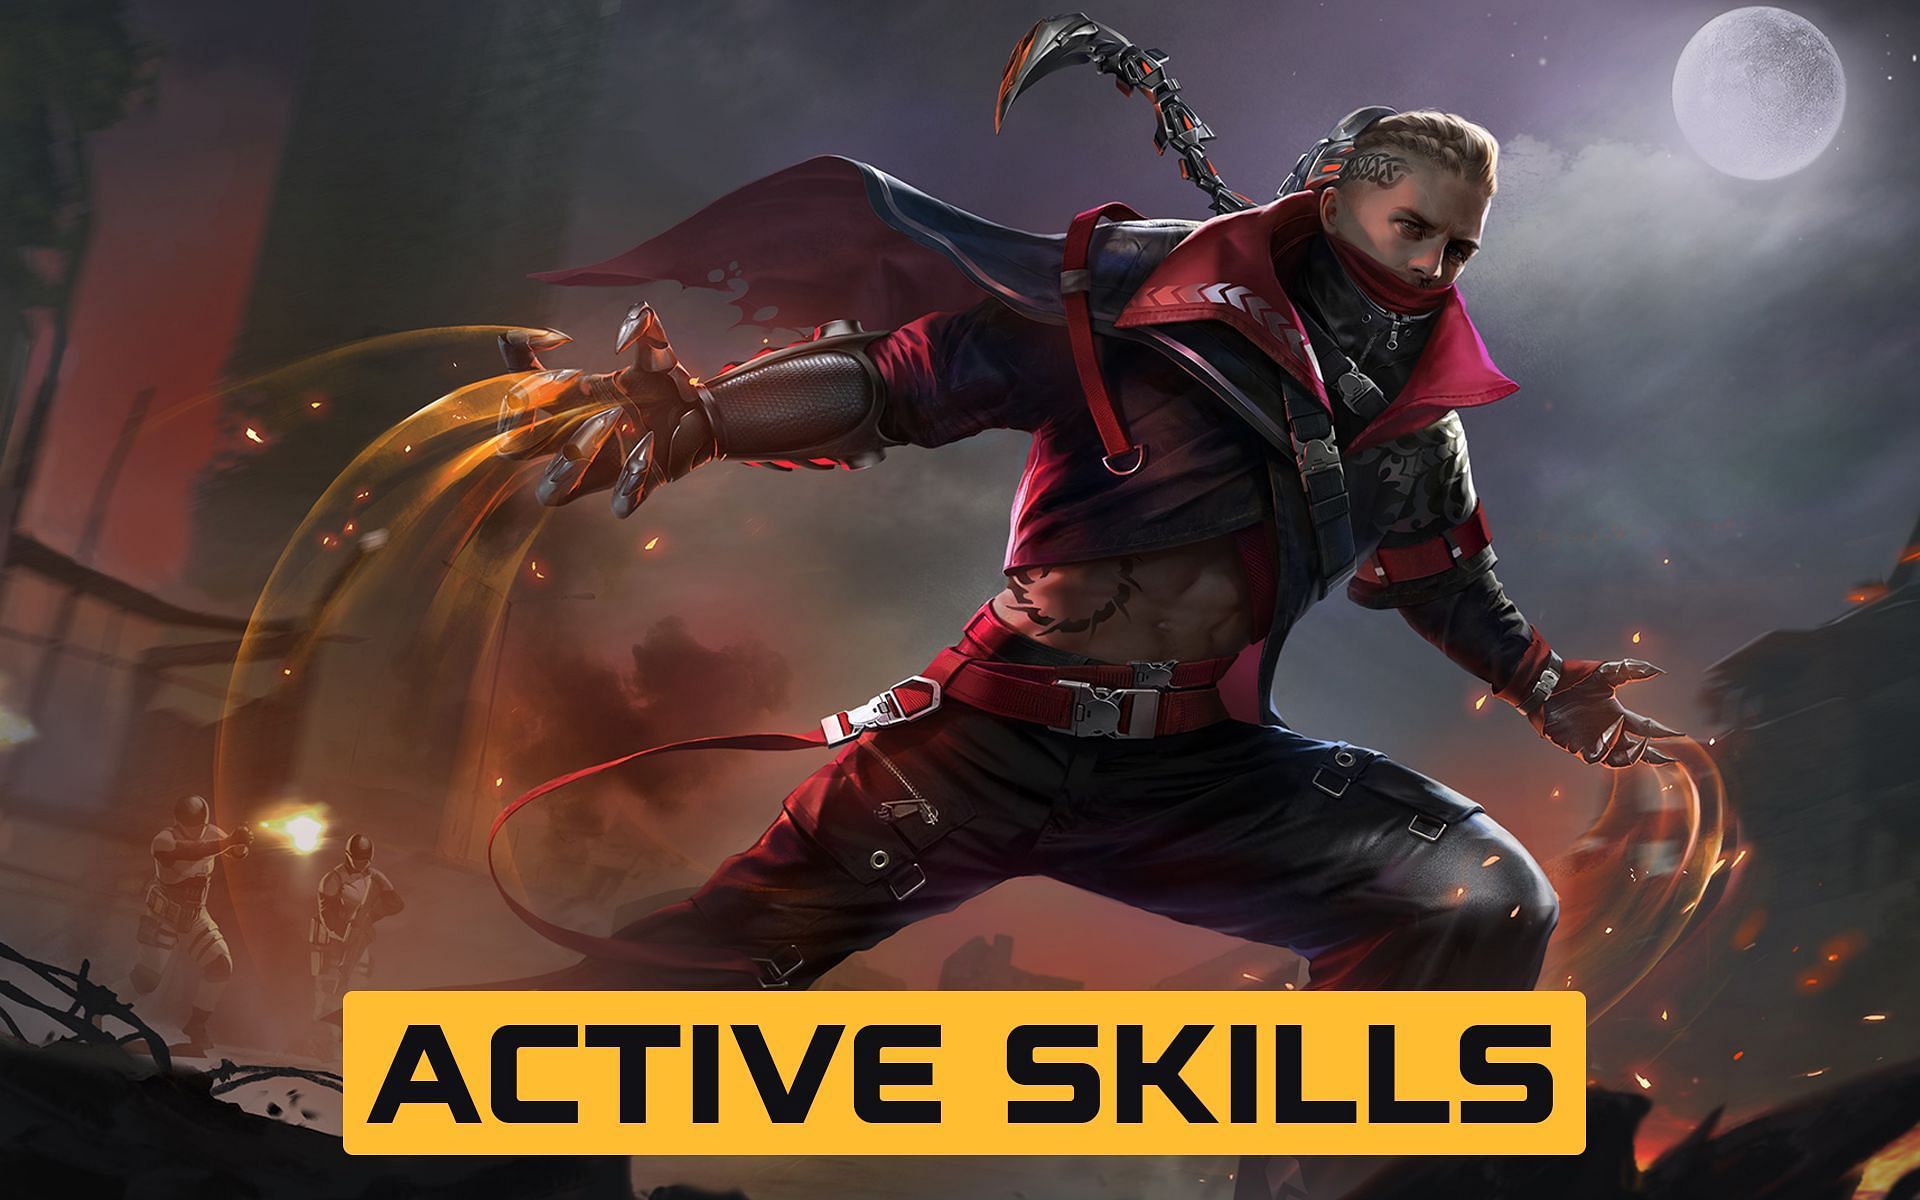 Free Fire characters with active skills are highly useful (Image via Sportskeeda)